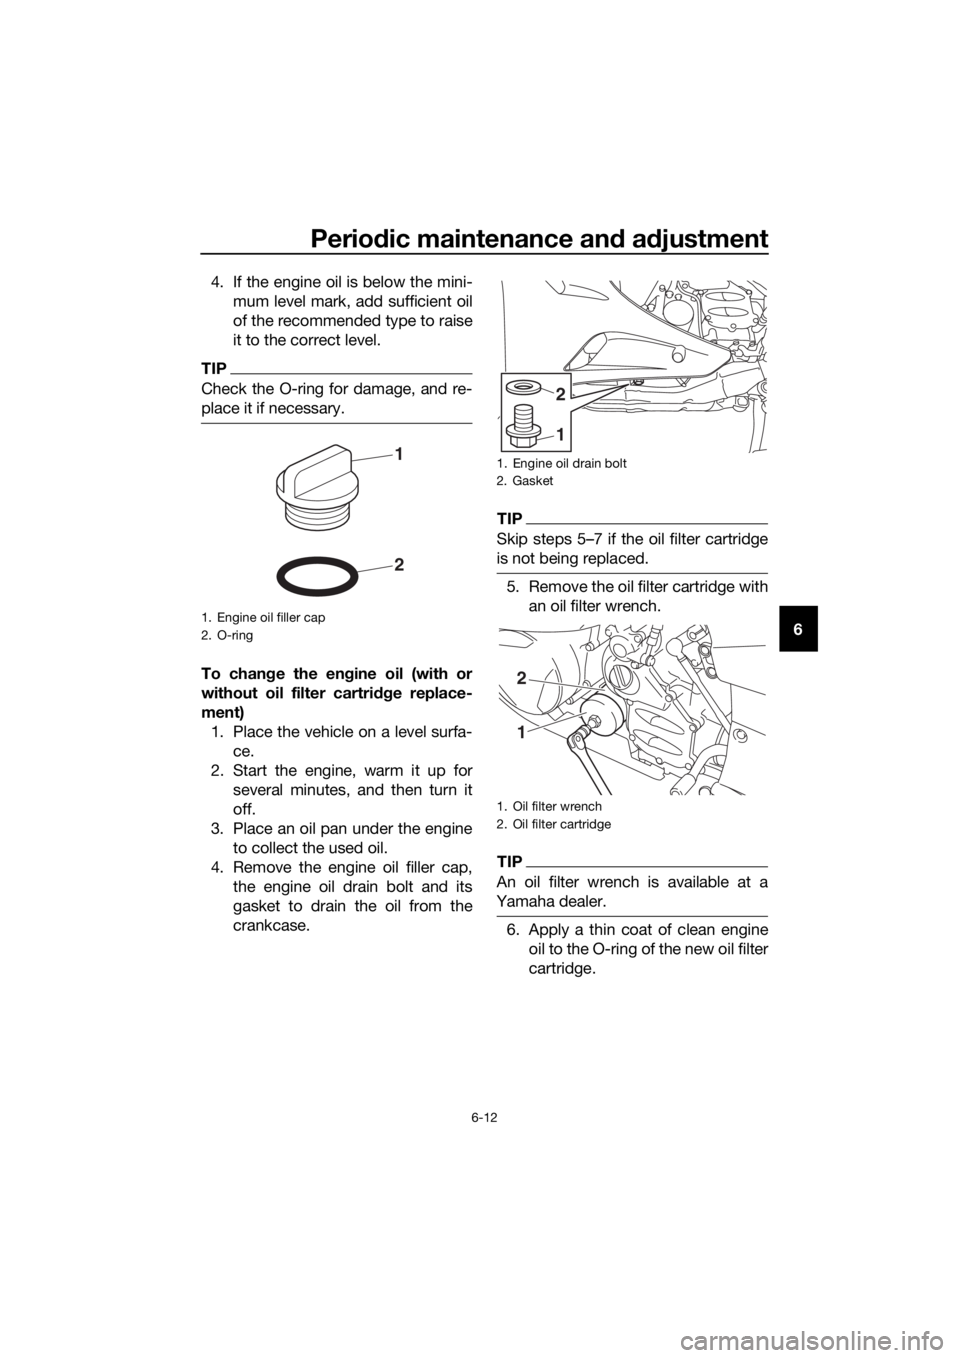 YAMAHA FJR1300AE 2020 User Guide Periodic maintenance and adjustment
6-12
6 4. If the engine oil is below the mini-
mum level mark, add sufficient oil
of the recommended type to raise
it to the correct level.
TIP
Check the O-ring for